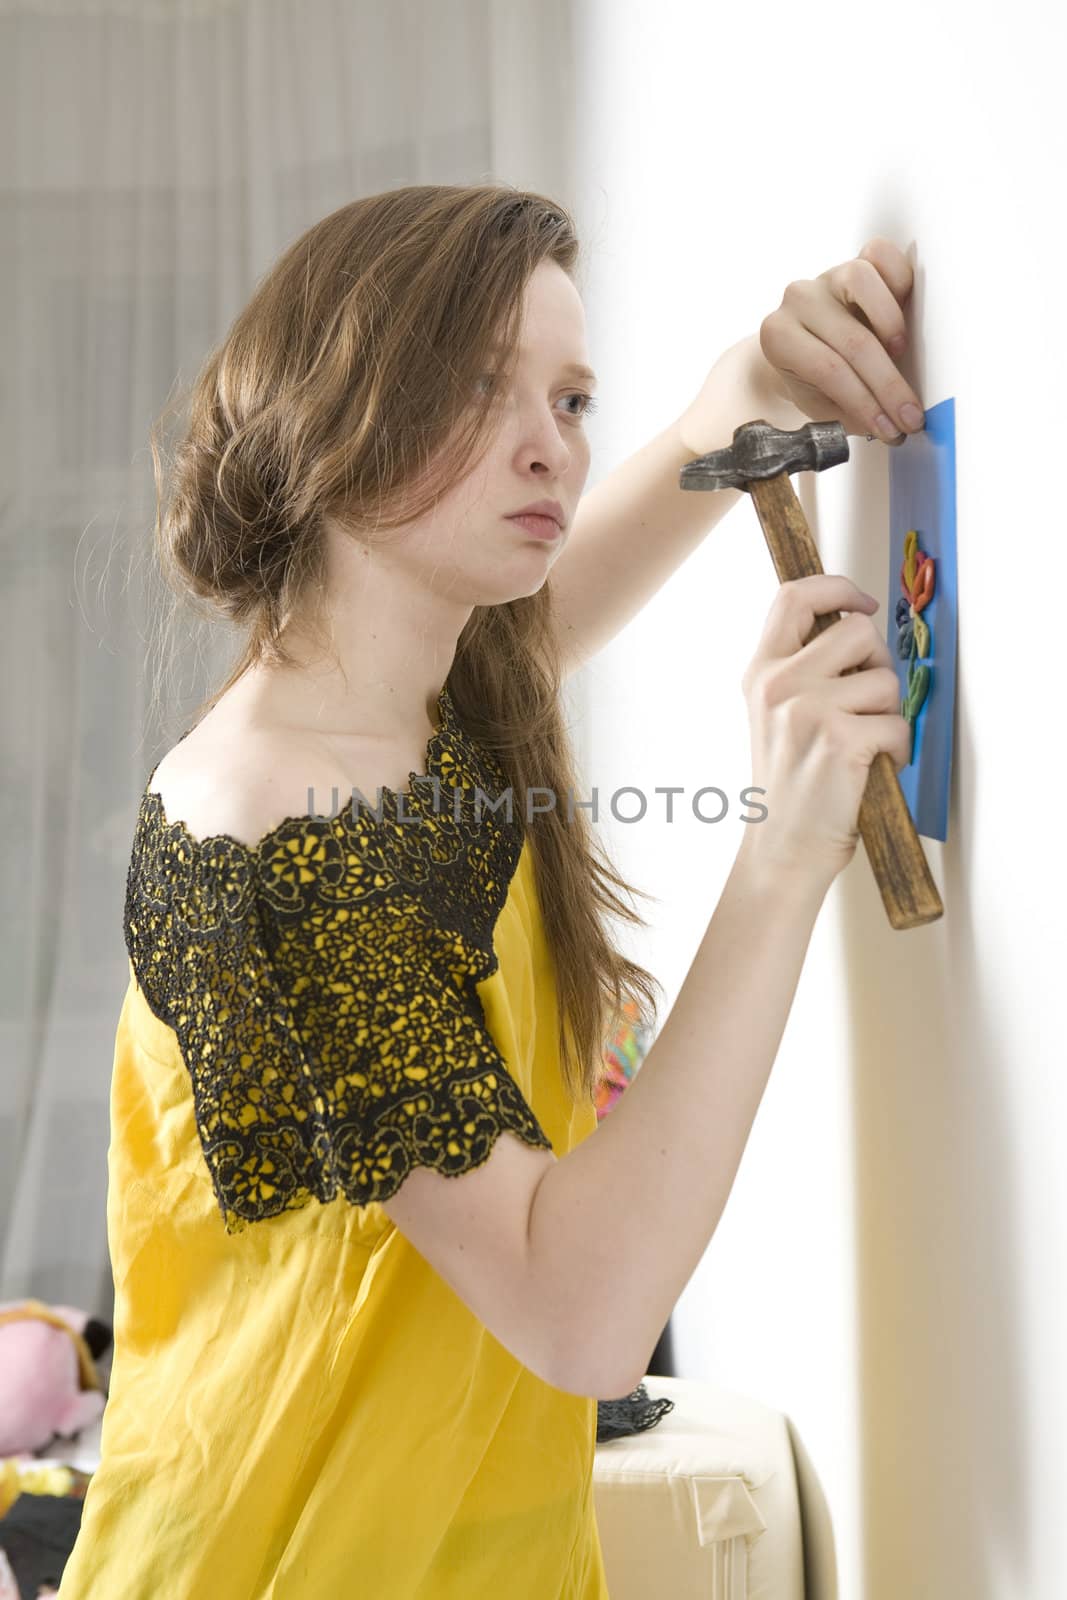 woman in openwork gloves trying to nail picture to white wall. Child picture.